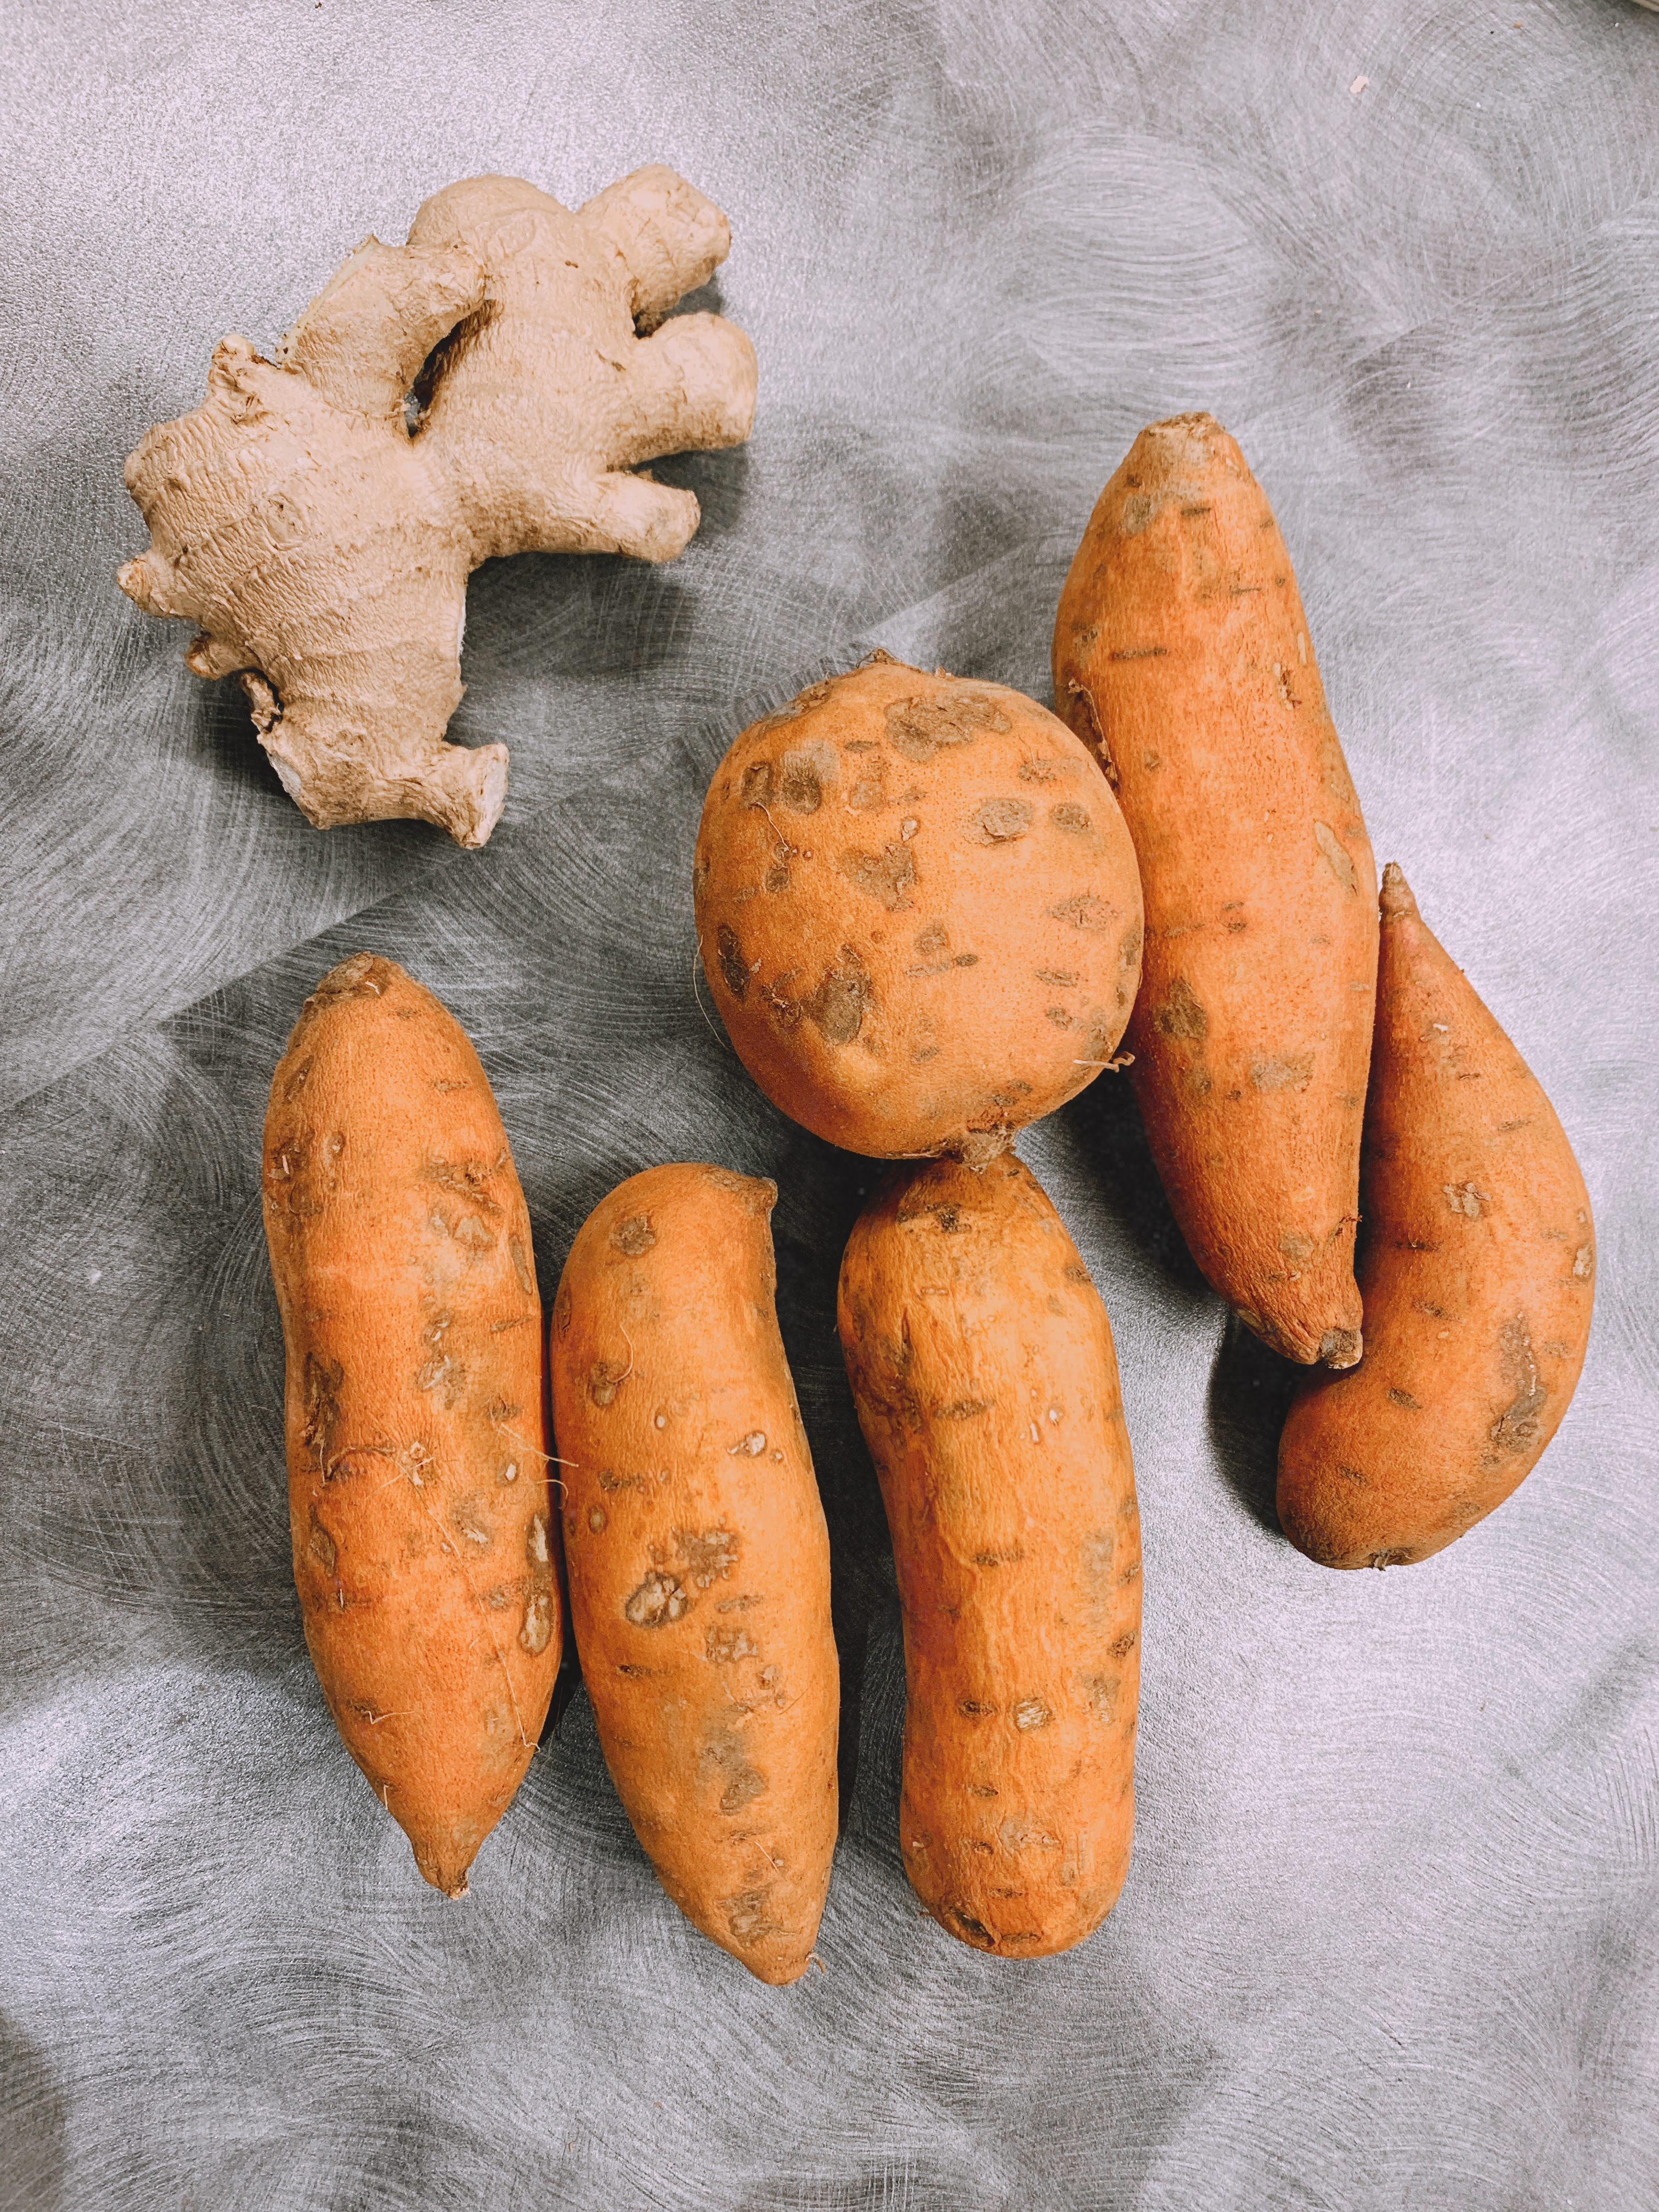 ginger and sweet potato ingredients